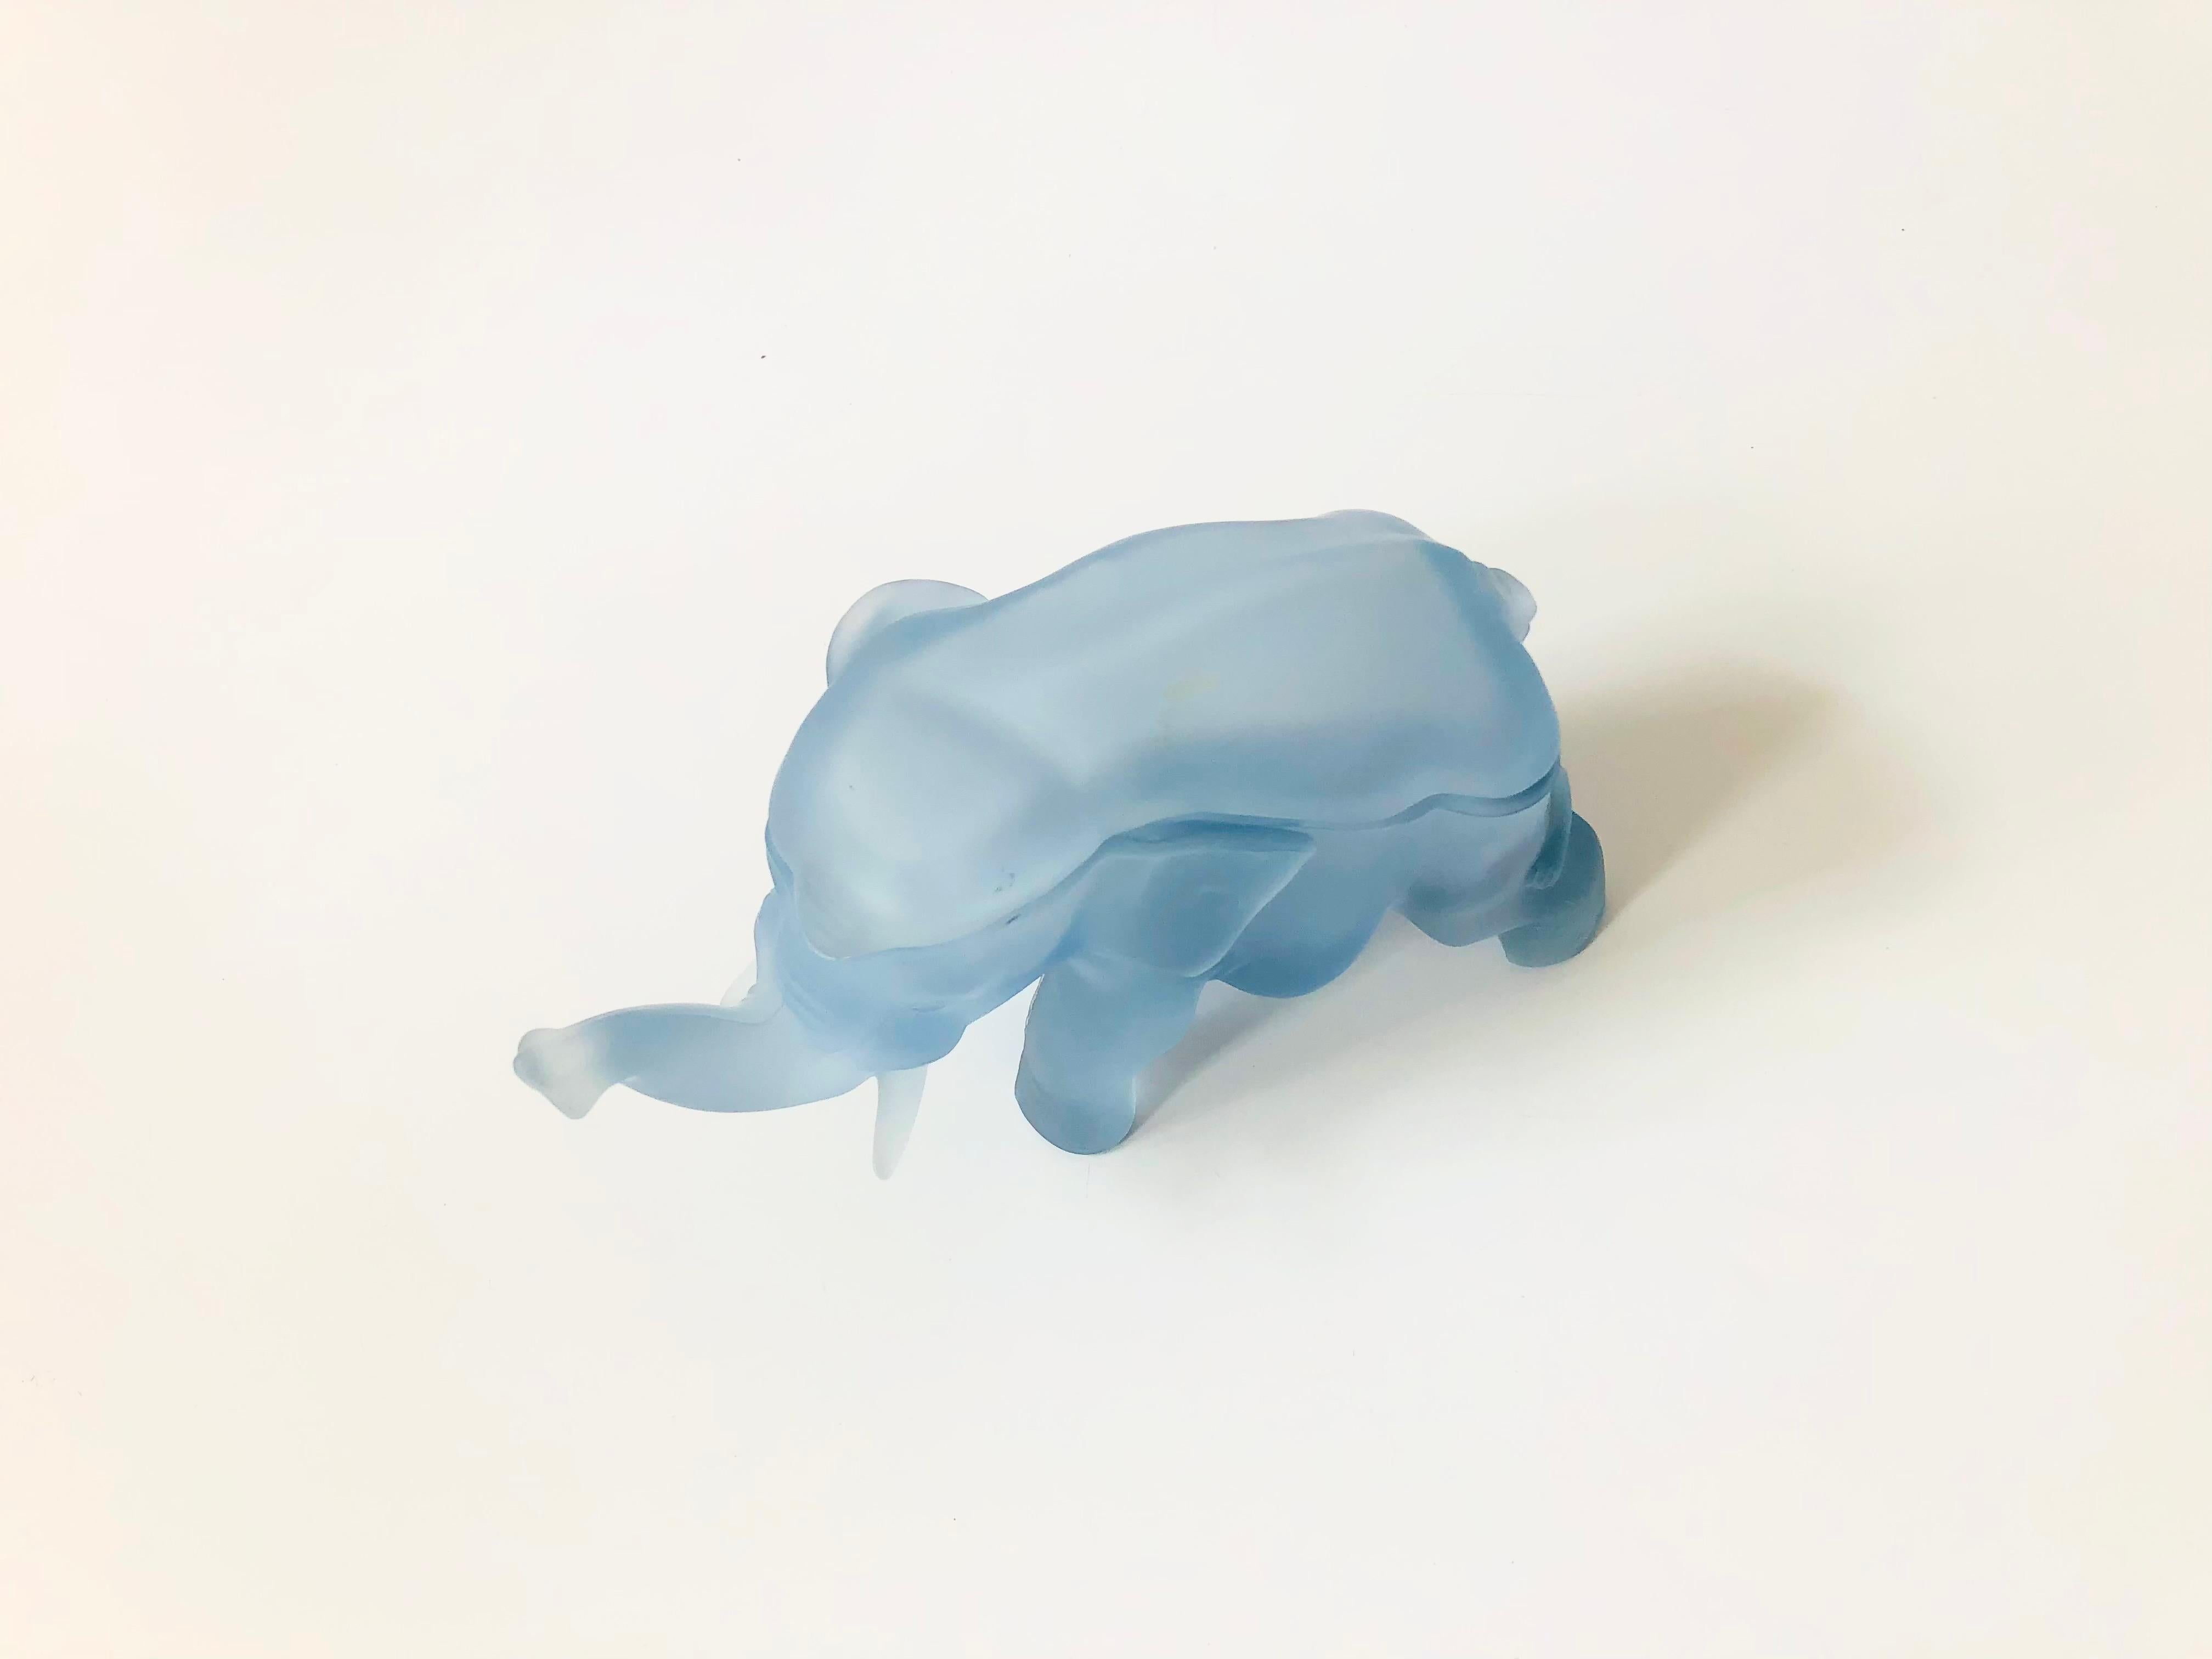 A vintage glass elephant box, made in the 1980s for the Tiara line by Indiana Glass. Beautiful pale blue satin finish to the glass. Perfect for storing small items or using as a jewelry box.